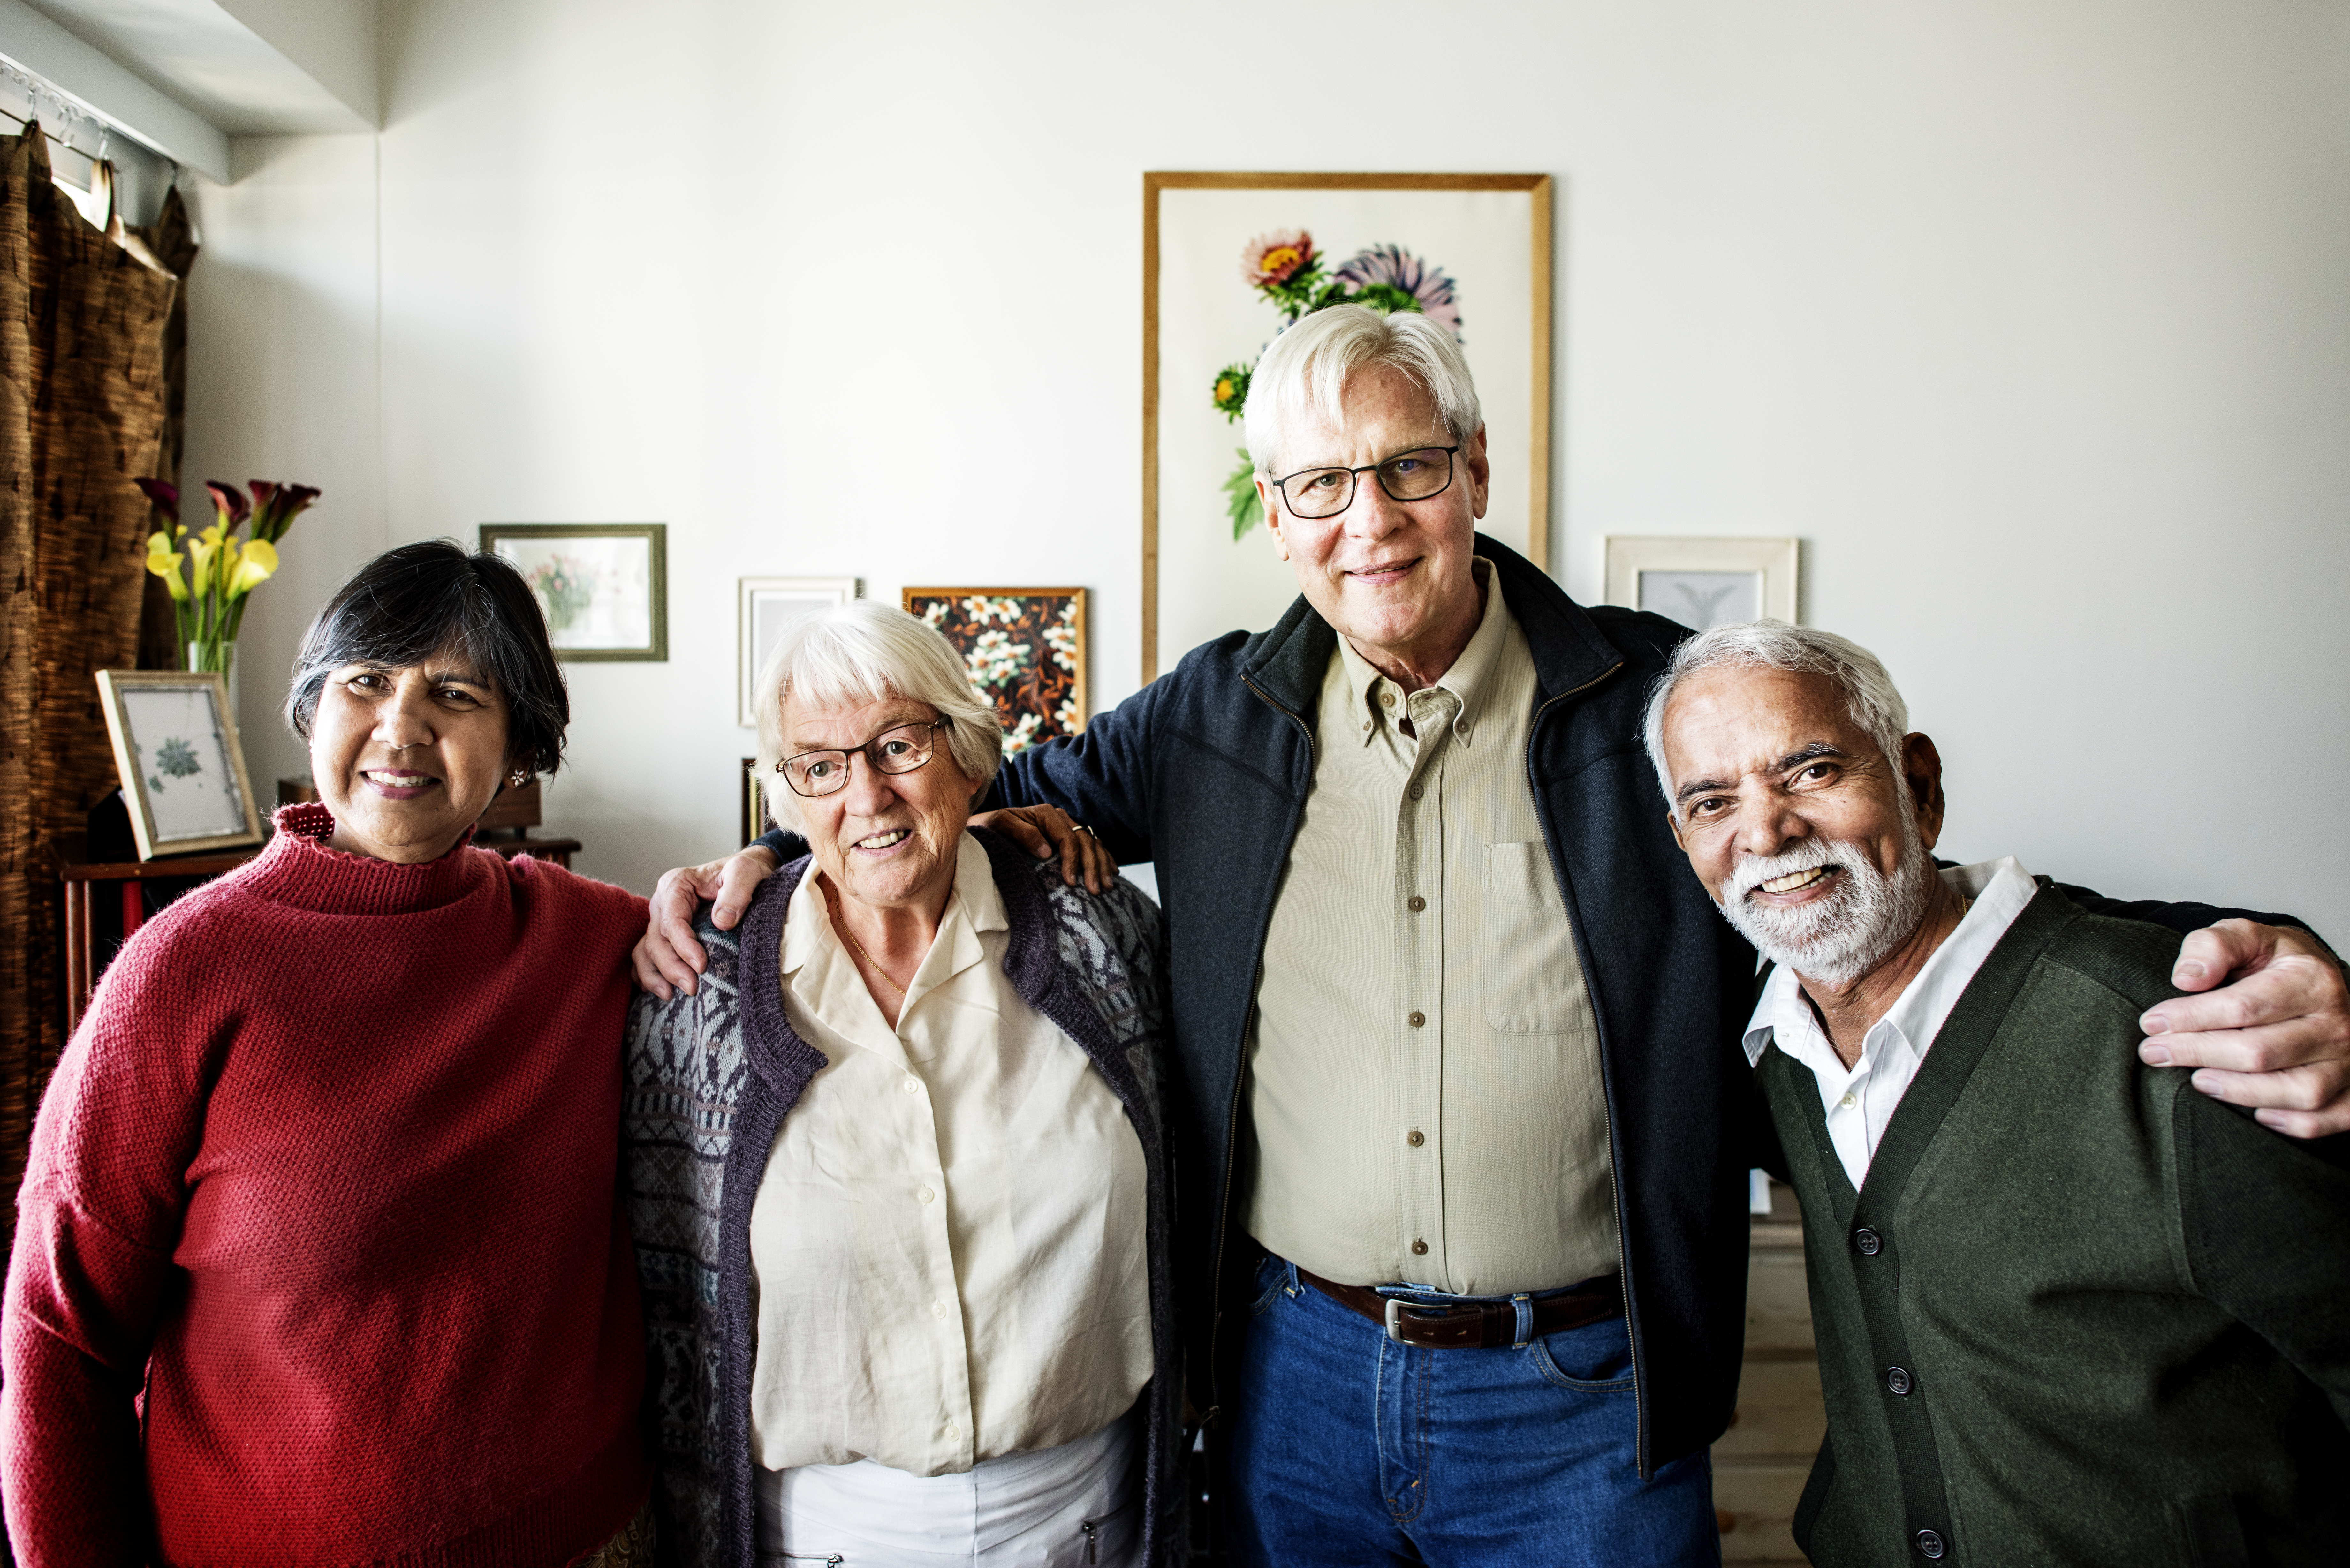 4 older men and woman standing next to each other with arms around each other smiling